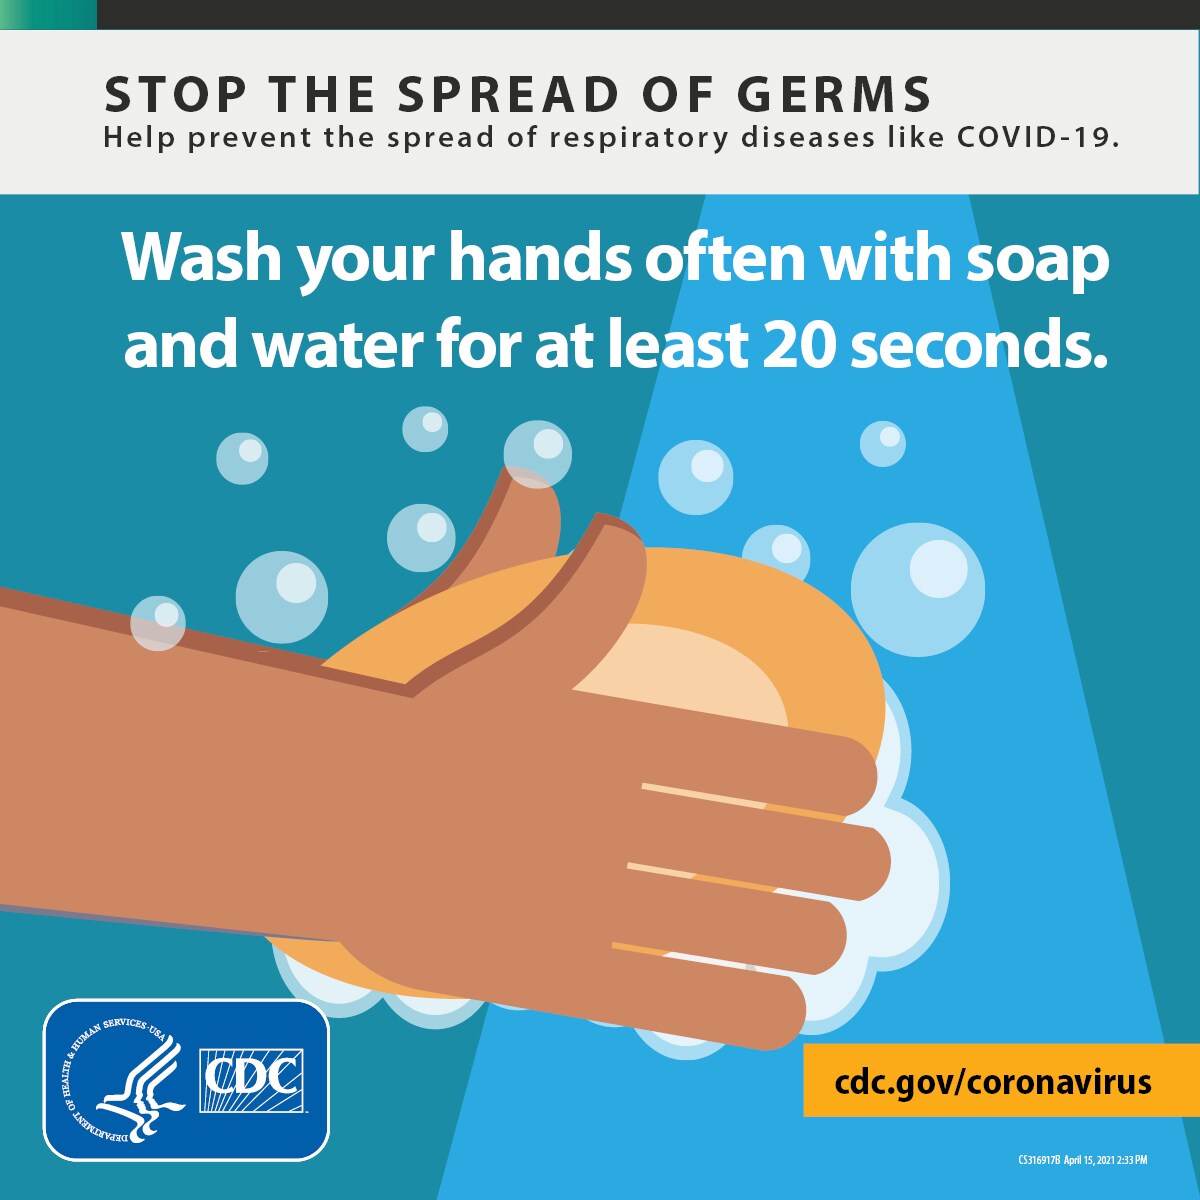 Person washing hands with text ‘Wash your hands often with soap and water for at least 20 seconds.